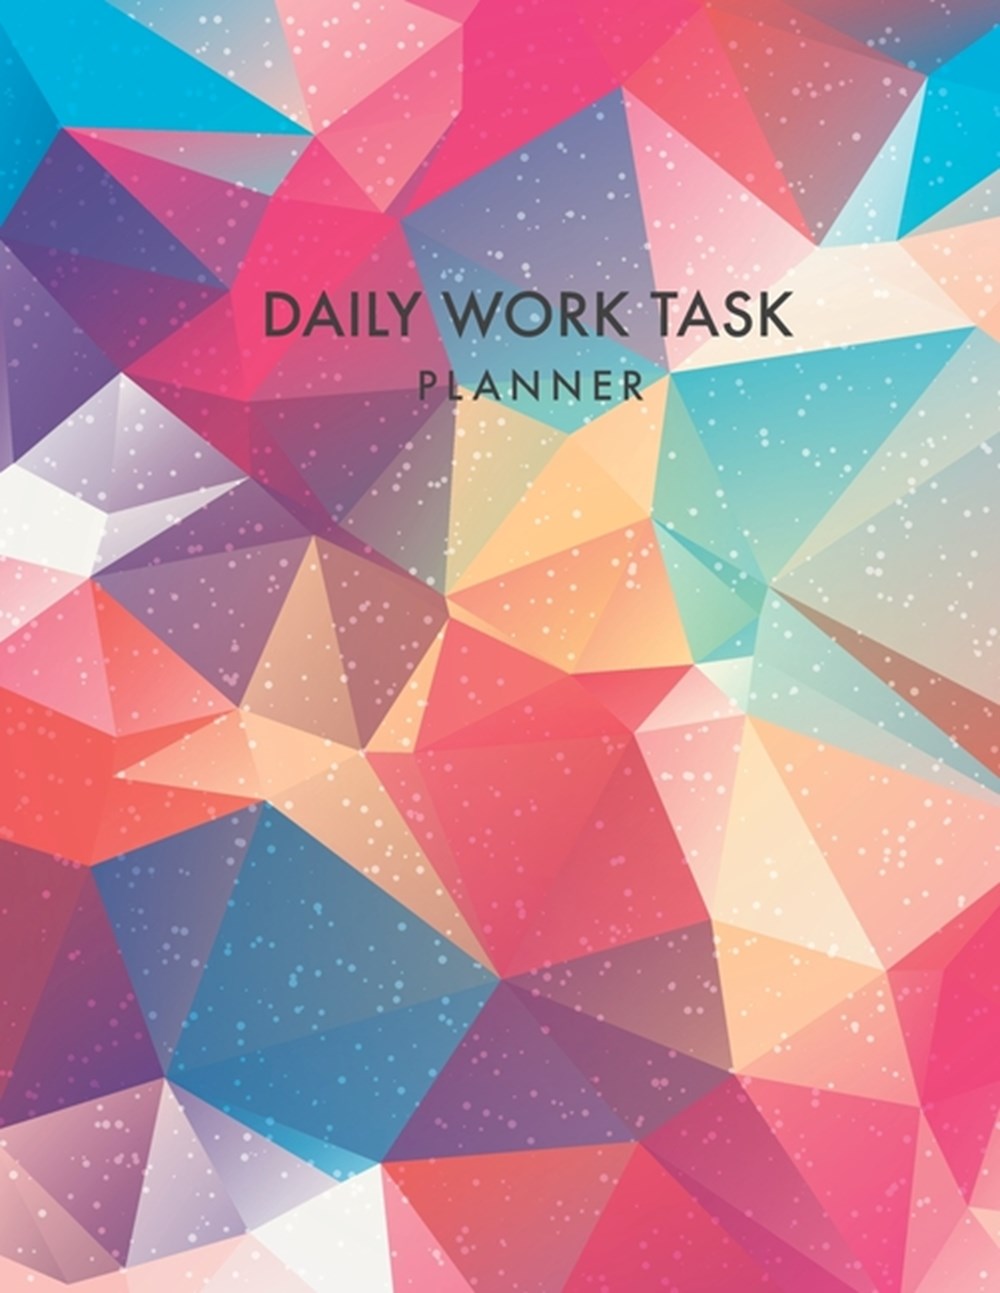 Daily Work Task Planner To-Do List Daily Organizer Task Management Planner Undated - Hourly Work Day